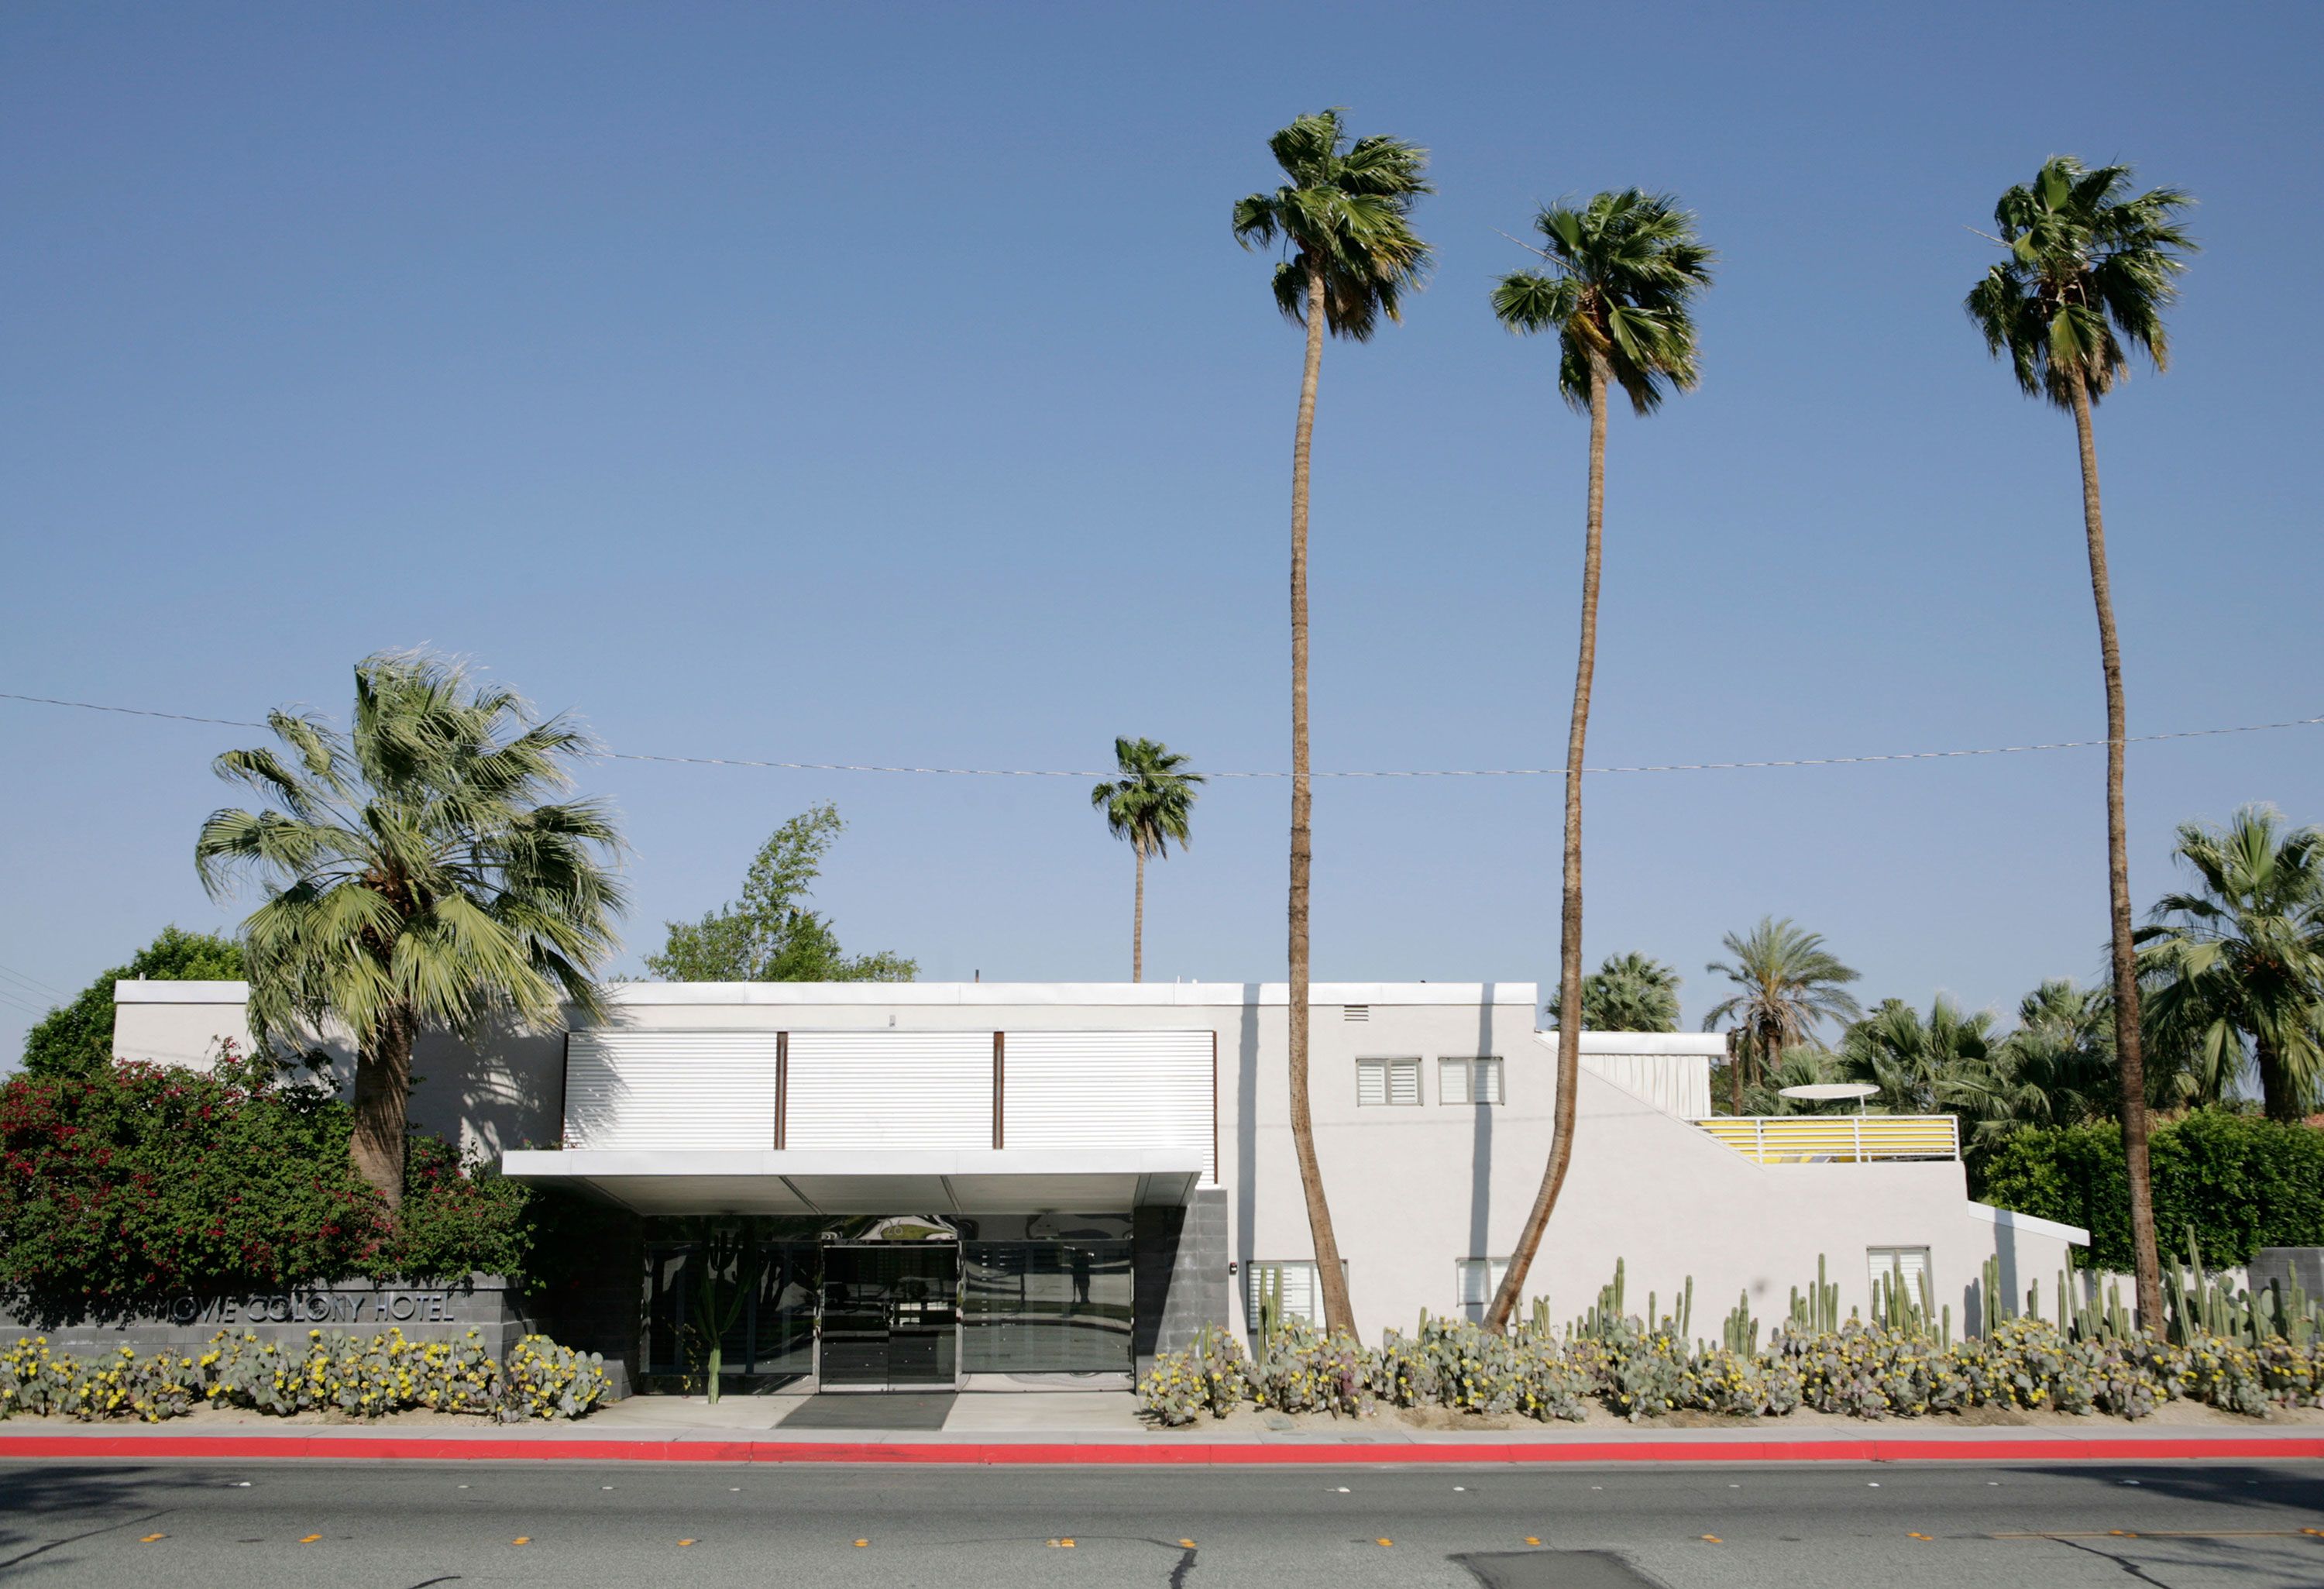 The Movie Colony Hotel, a modernist building Frey designed in Palm Springs, California in 1935.